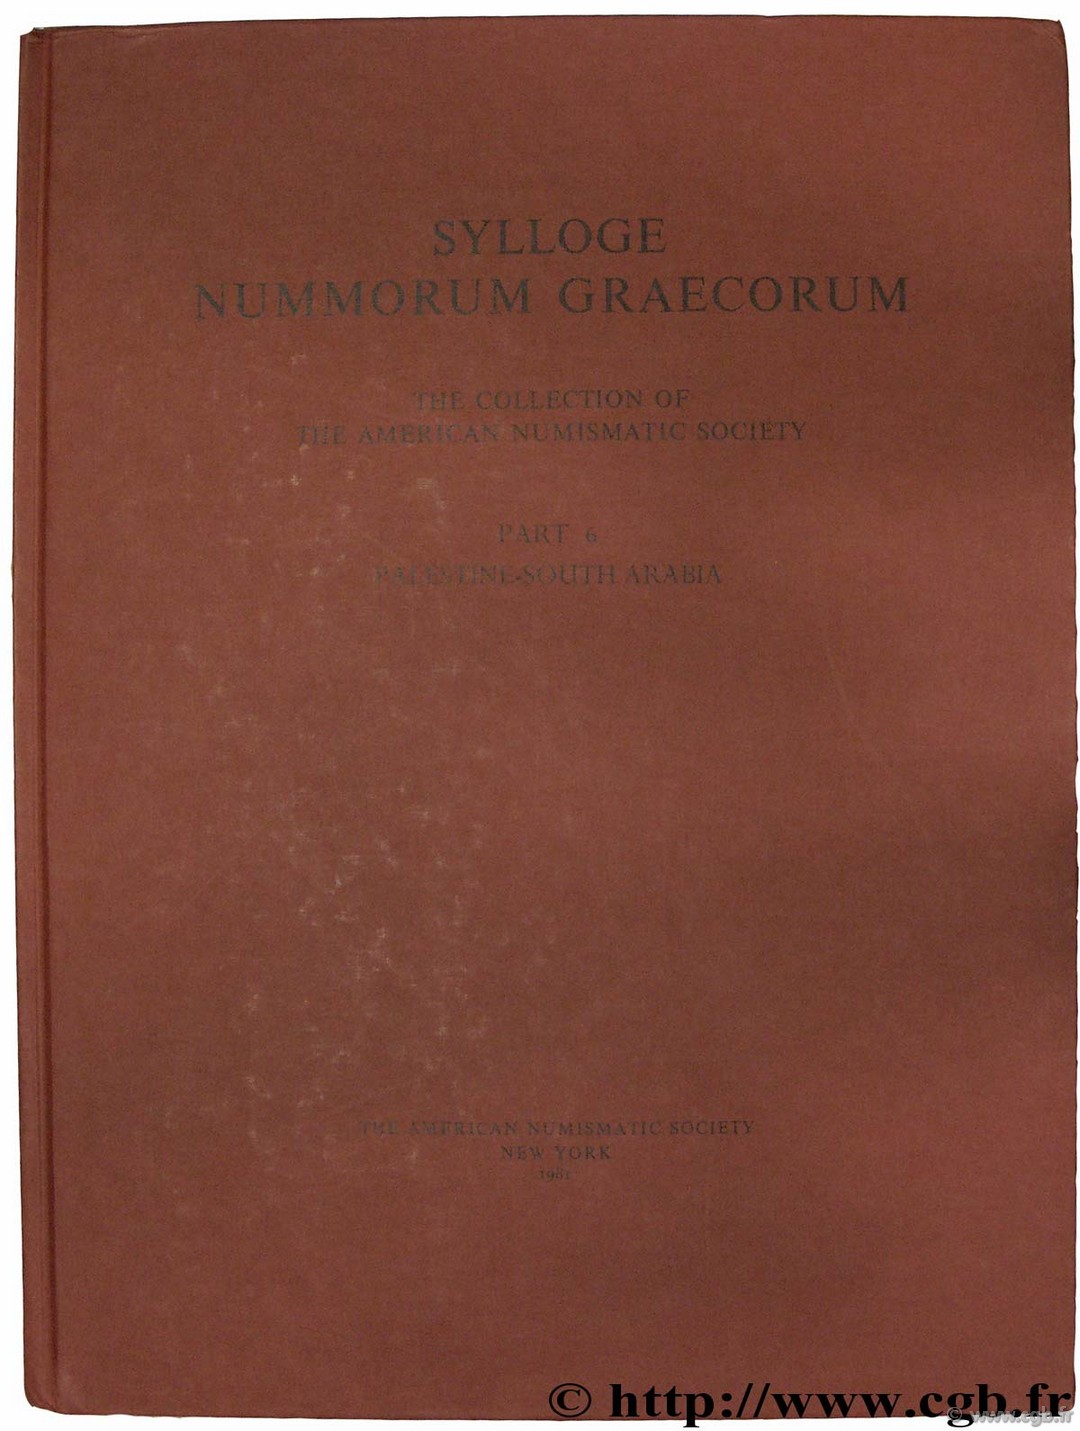 Sylloge Nummorum Graecorum, The collection of the American Numismatic Society, part 6, Palestine - South Arabia 